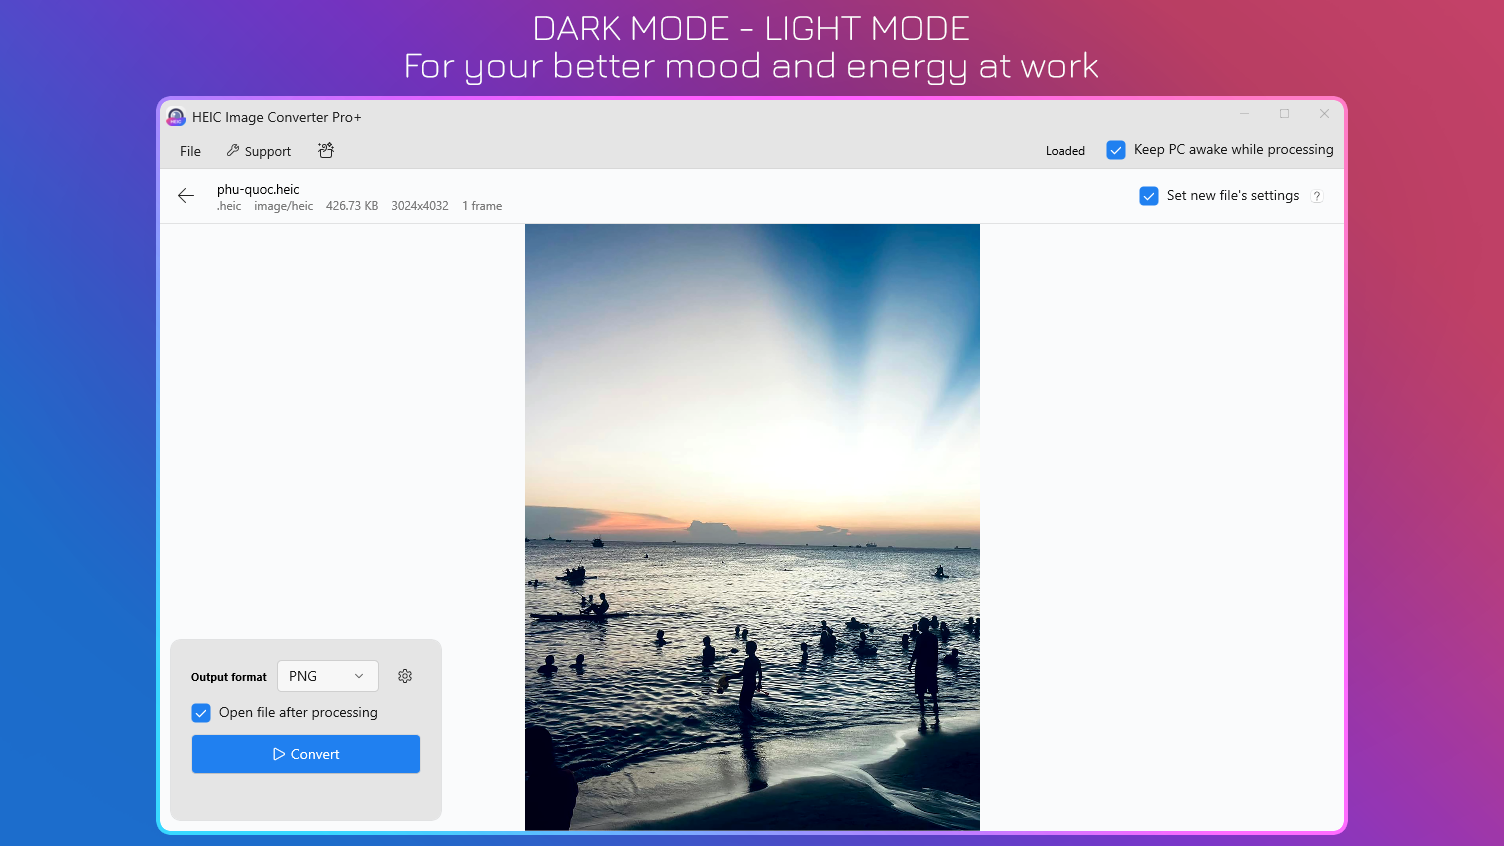 Dark Mode - Light Mode - For your better mood and energy at work